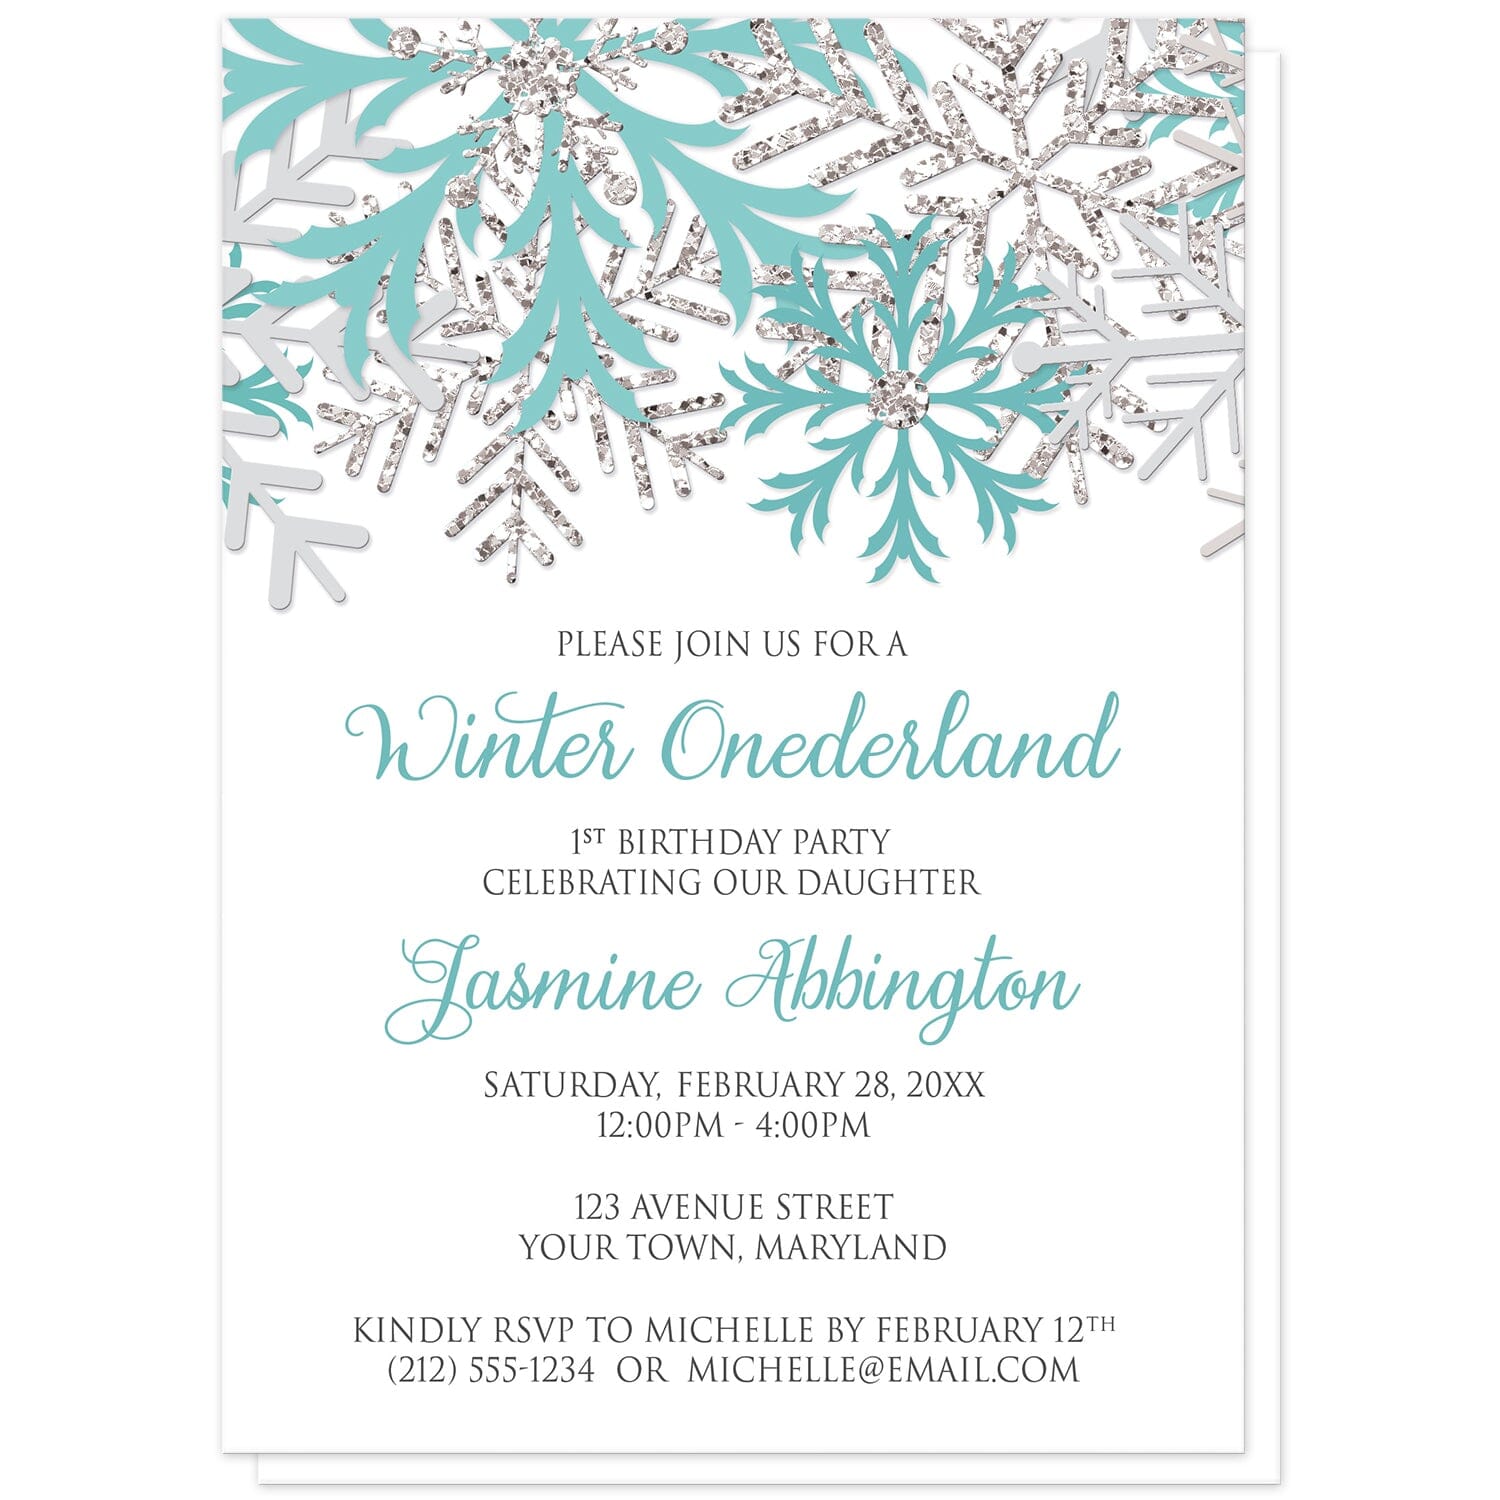 Teal Silver Snowflake 1st Birthday Winter Onederland Invitations at Artistically Invited. Pretty teal silver snowflake 1st birthday Winter Onederland invitations designed with teal, light teal, silver-colored glitter-illustrated, and light gray snowflakes along the top of the invitations. Your personalized 1st birthday party details are custom printed in teal and gray on white below the snowflakes.